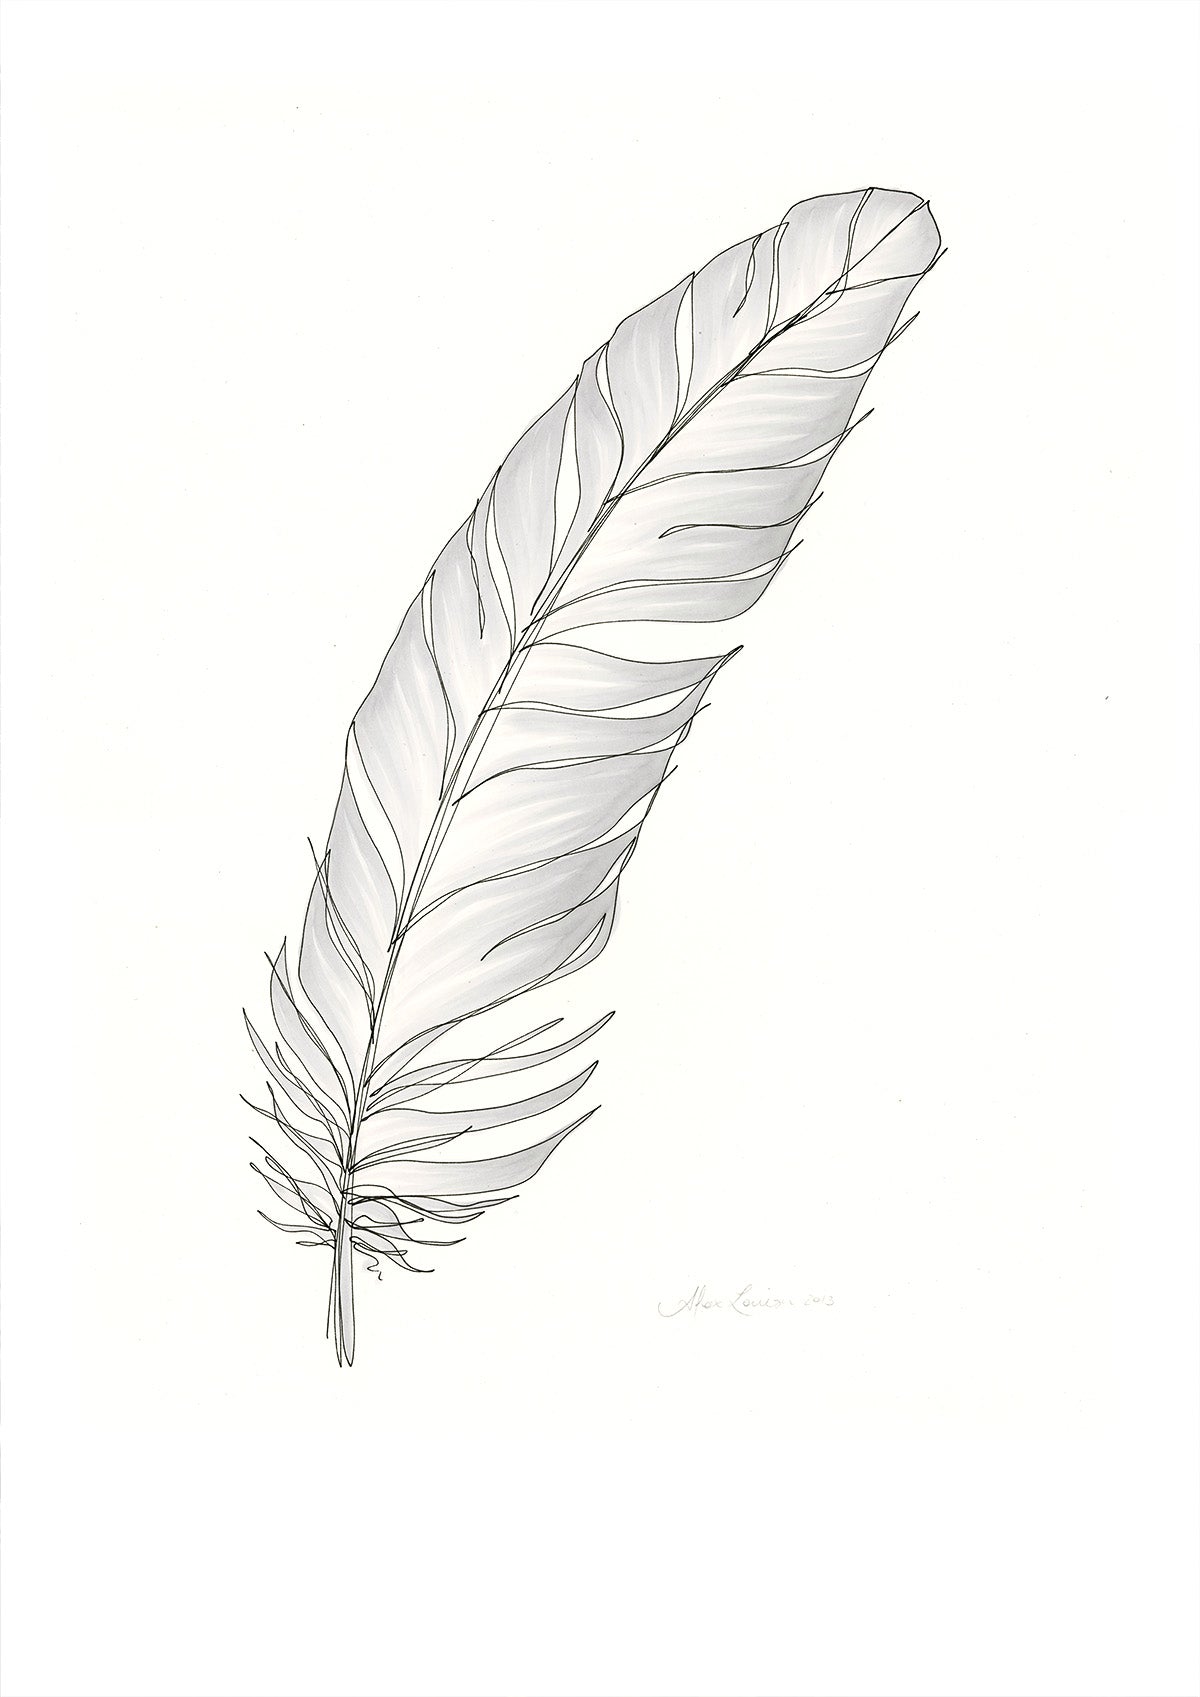 Feather Lines #6 - 12 x 16"